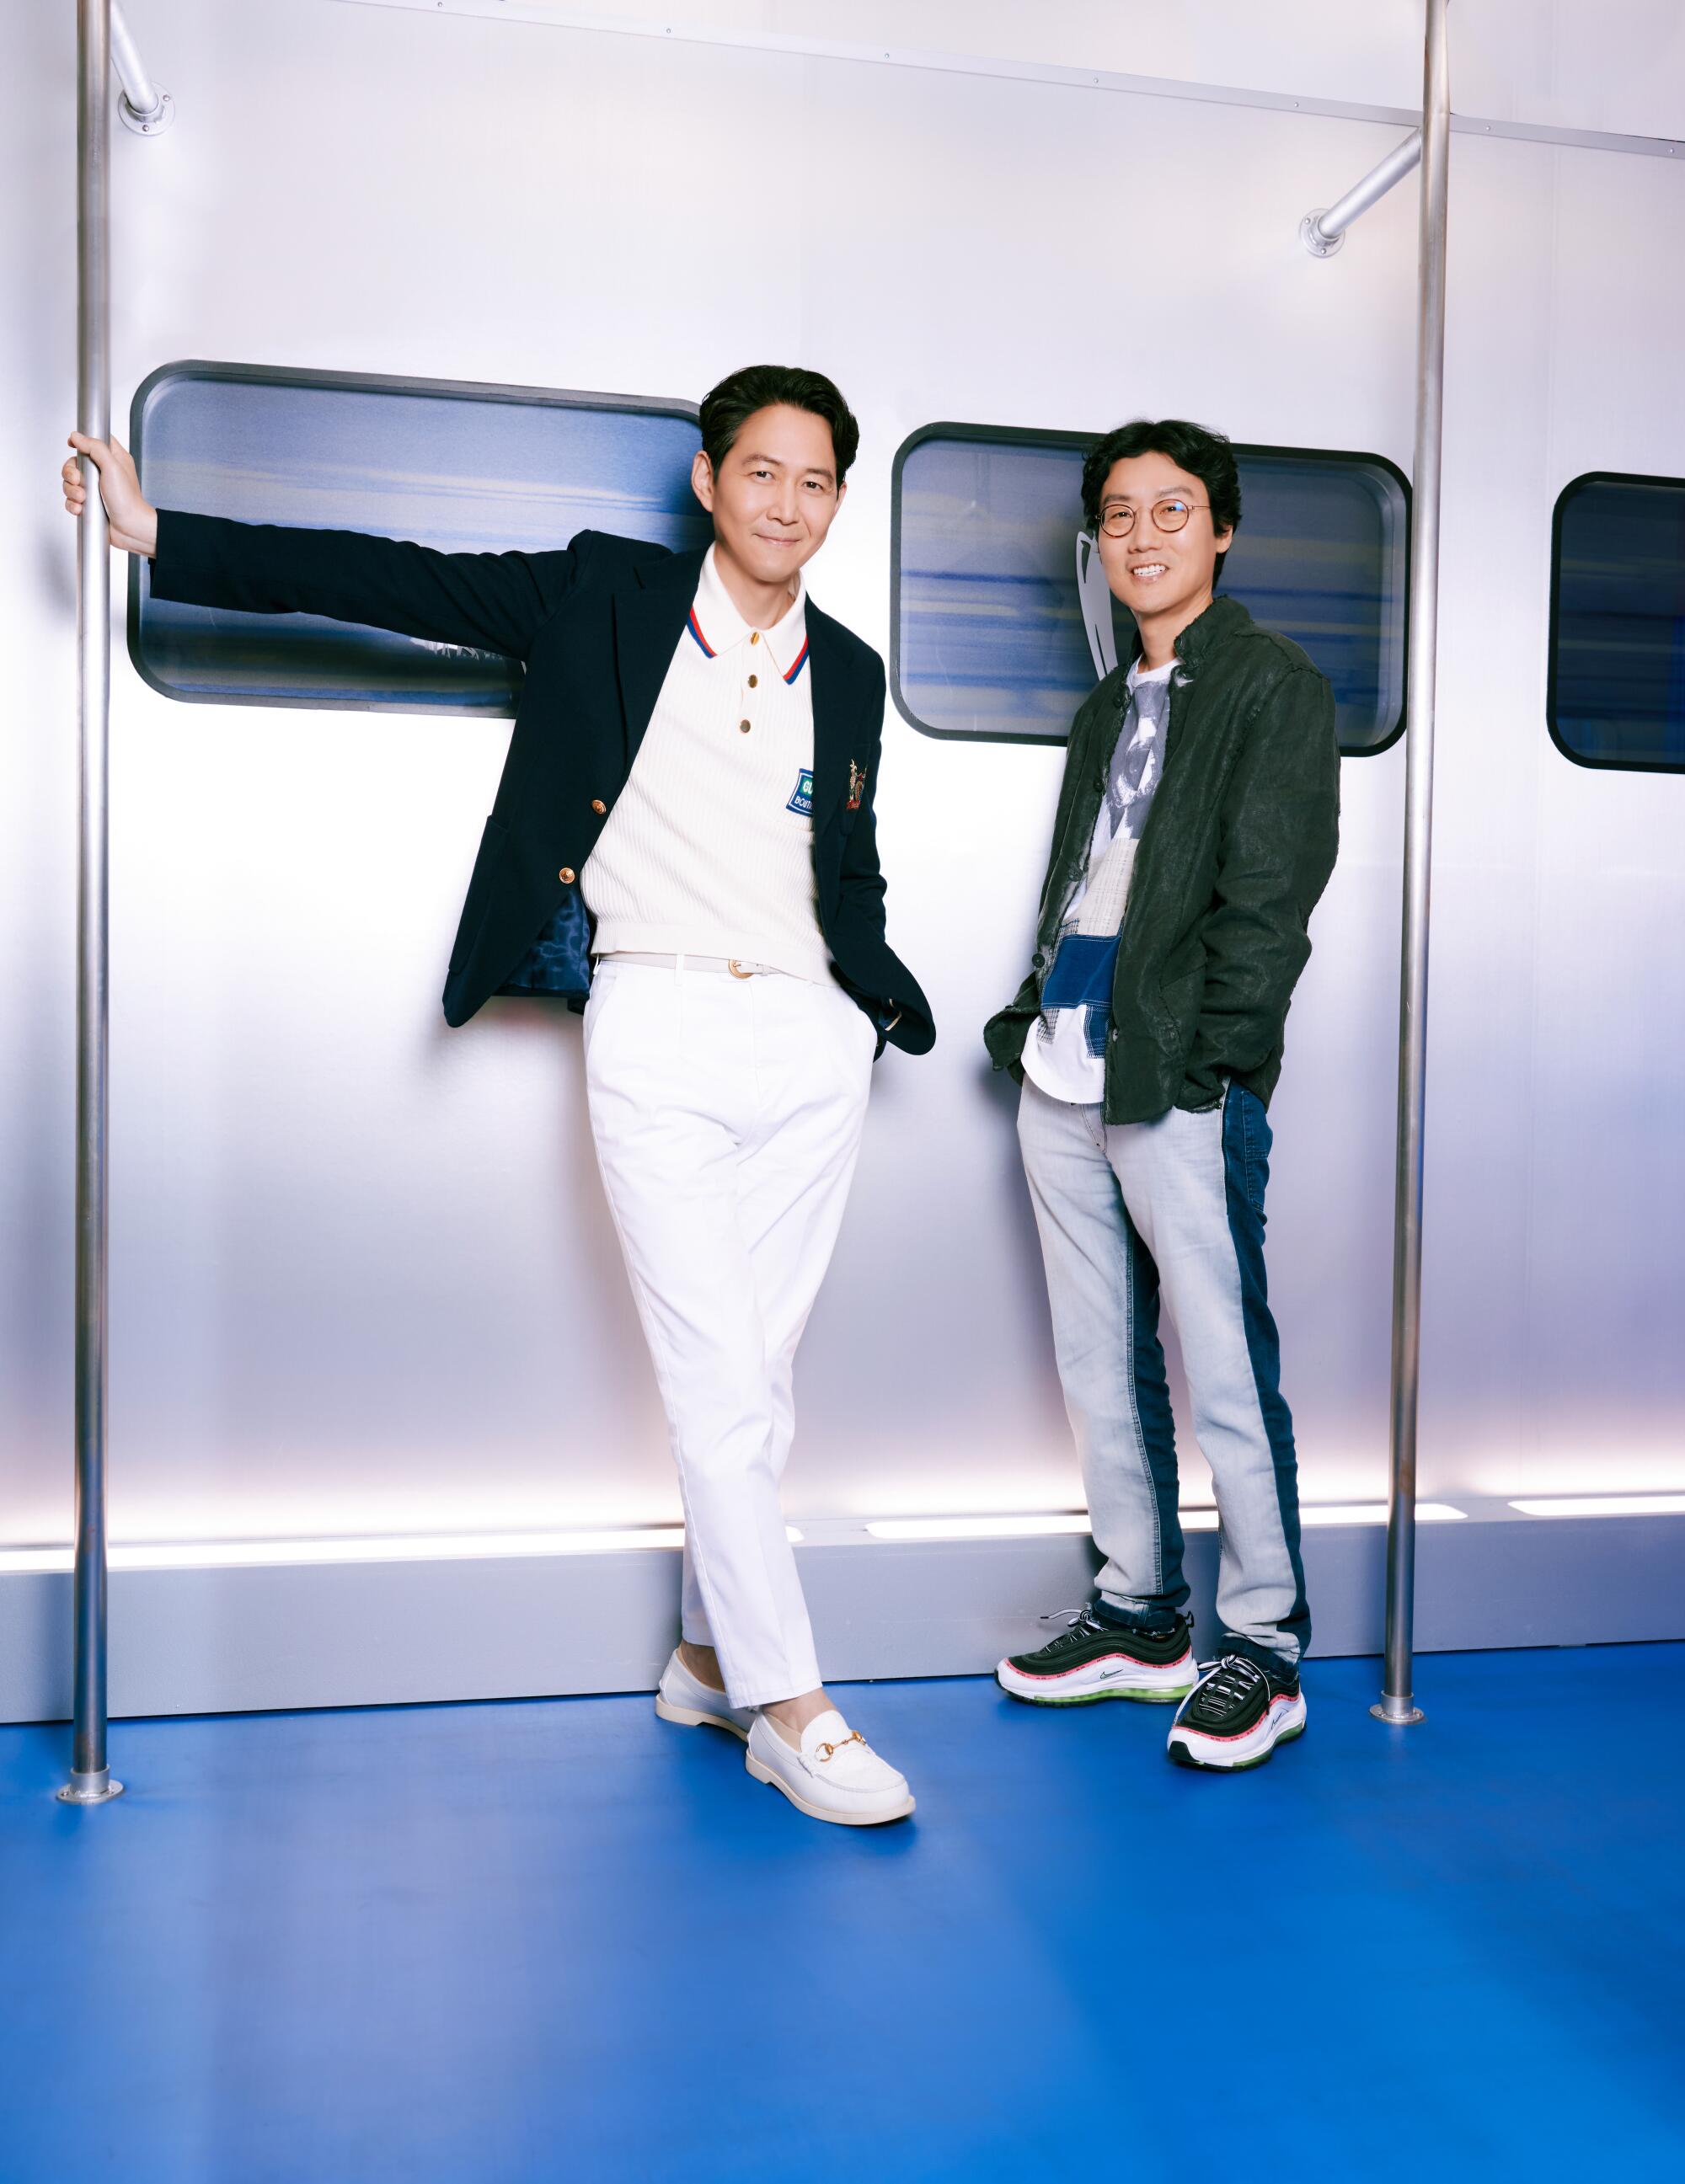 "Squid Game"  creator Hwang Dong-hyuk and actor Lee Jung-jae pose for a portrait.